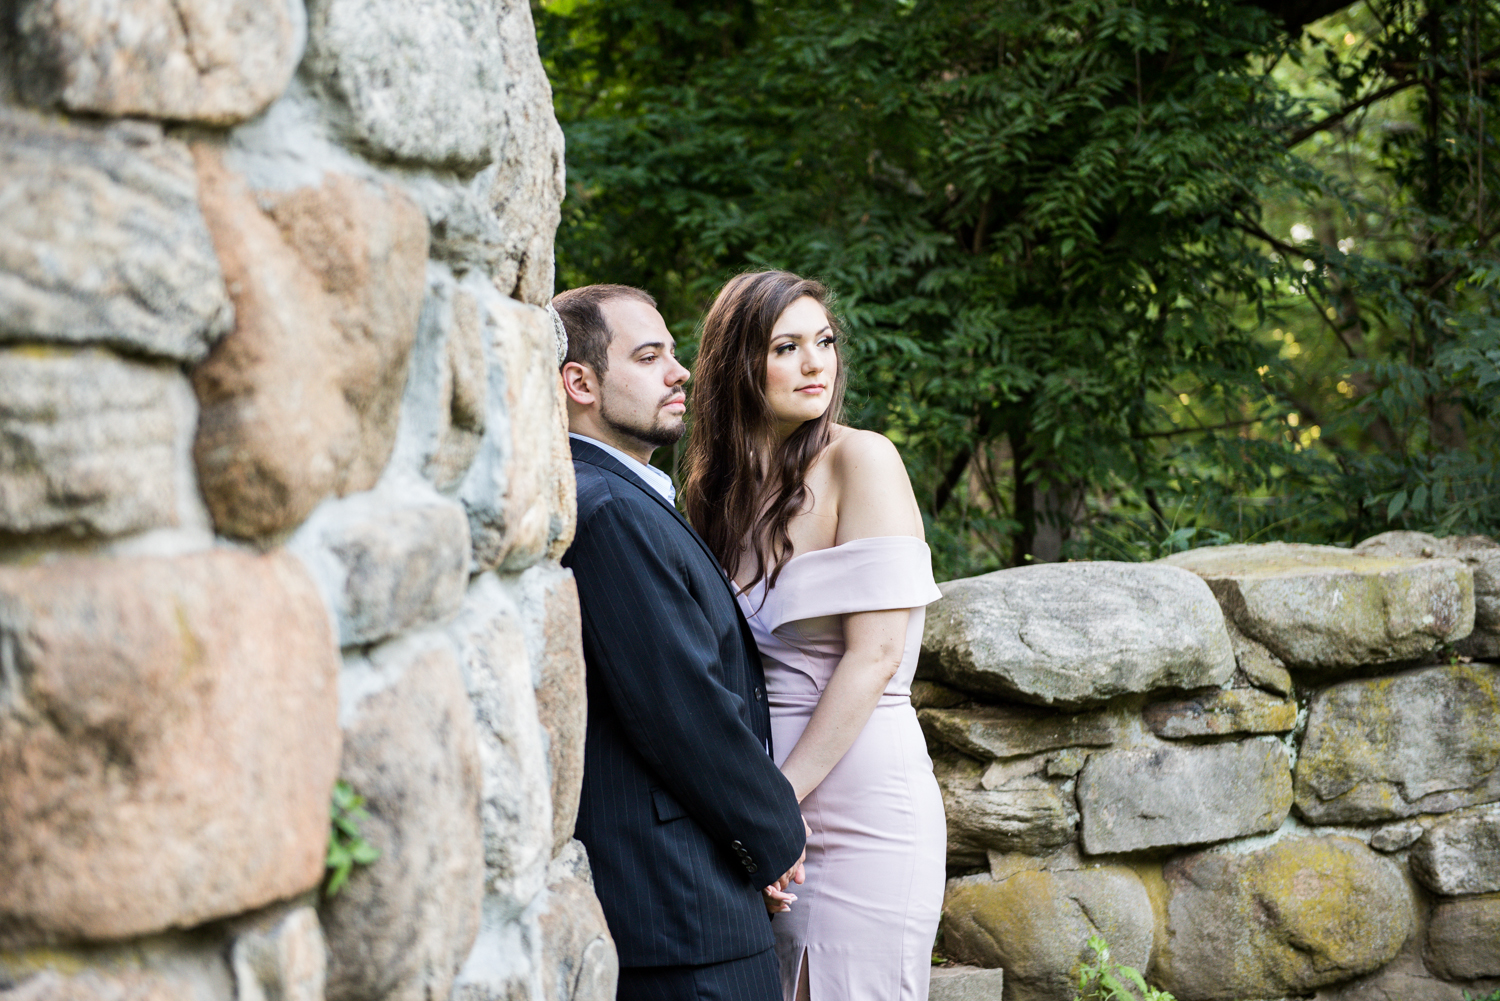 tods-point-park-engagement-session-greenwich-ct-3.jpg